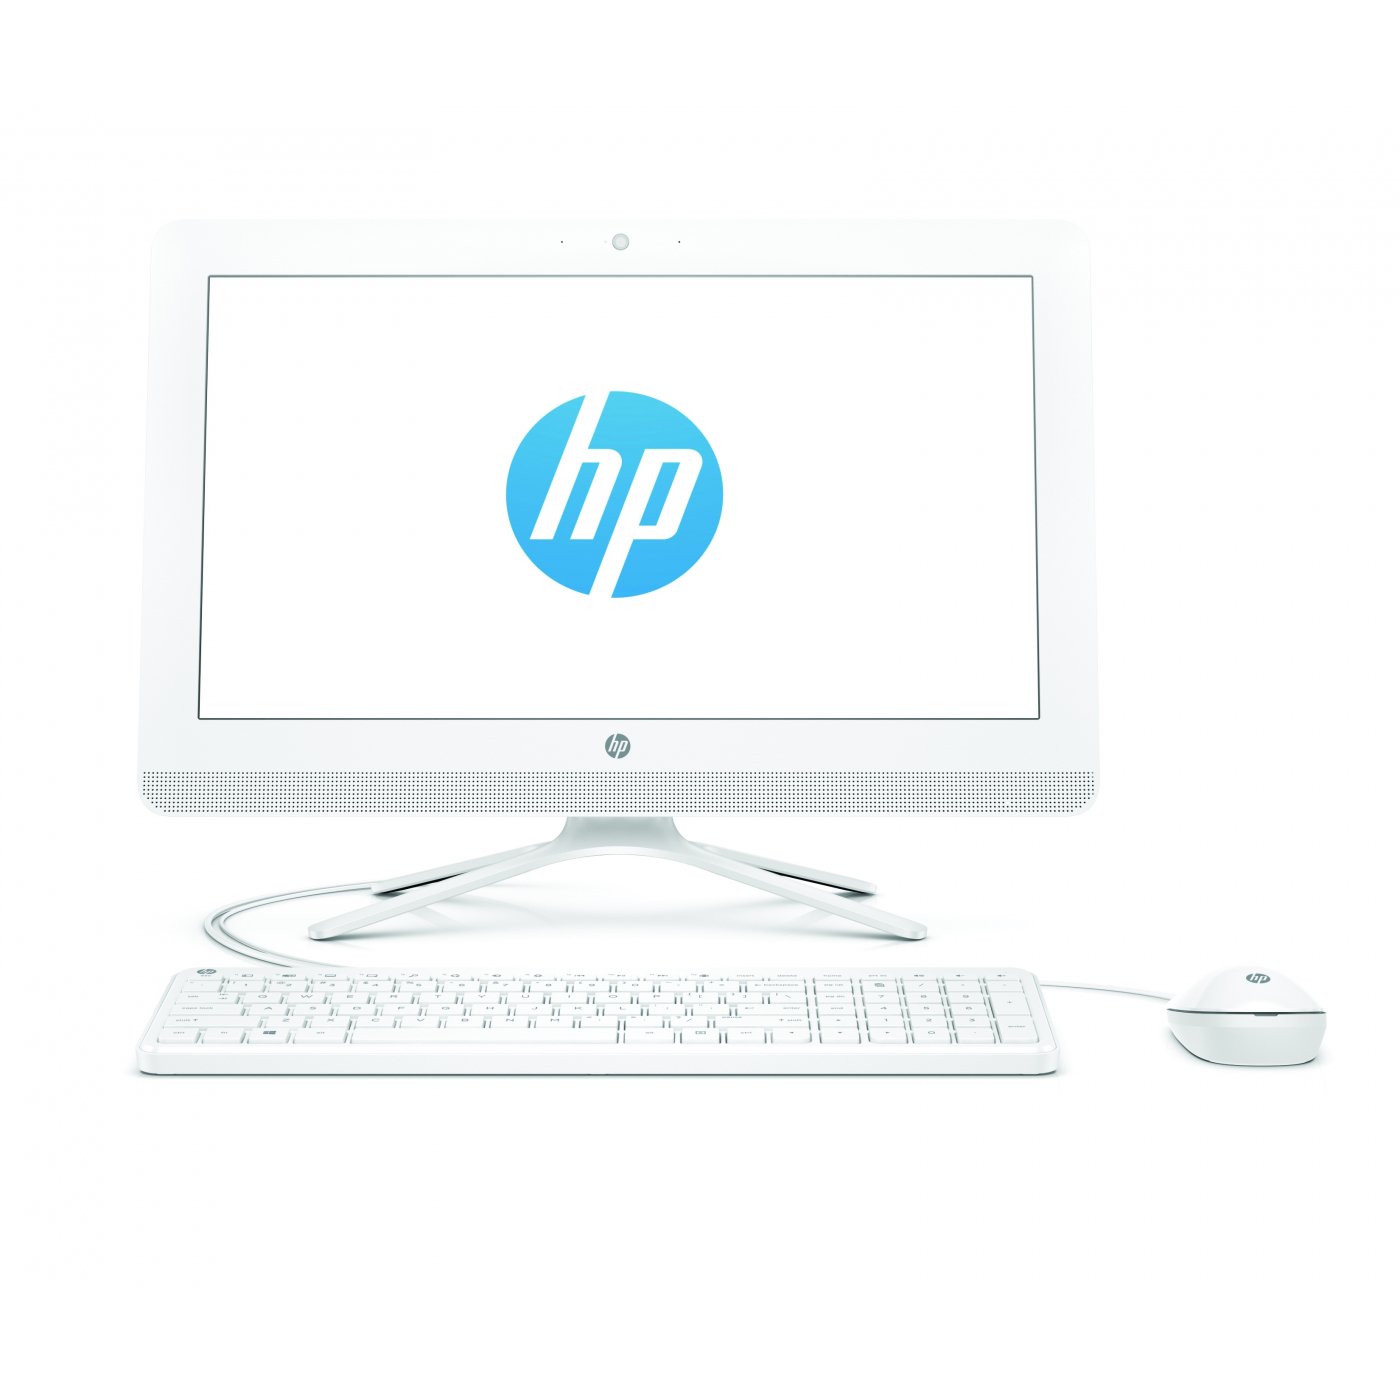 hp_all-in-one_celeron_pc